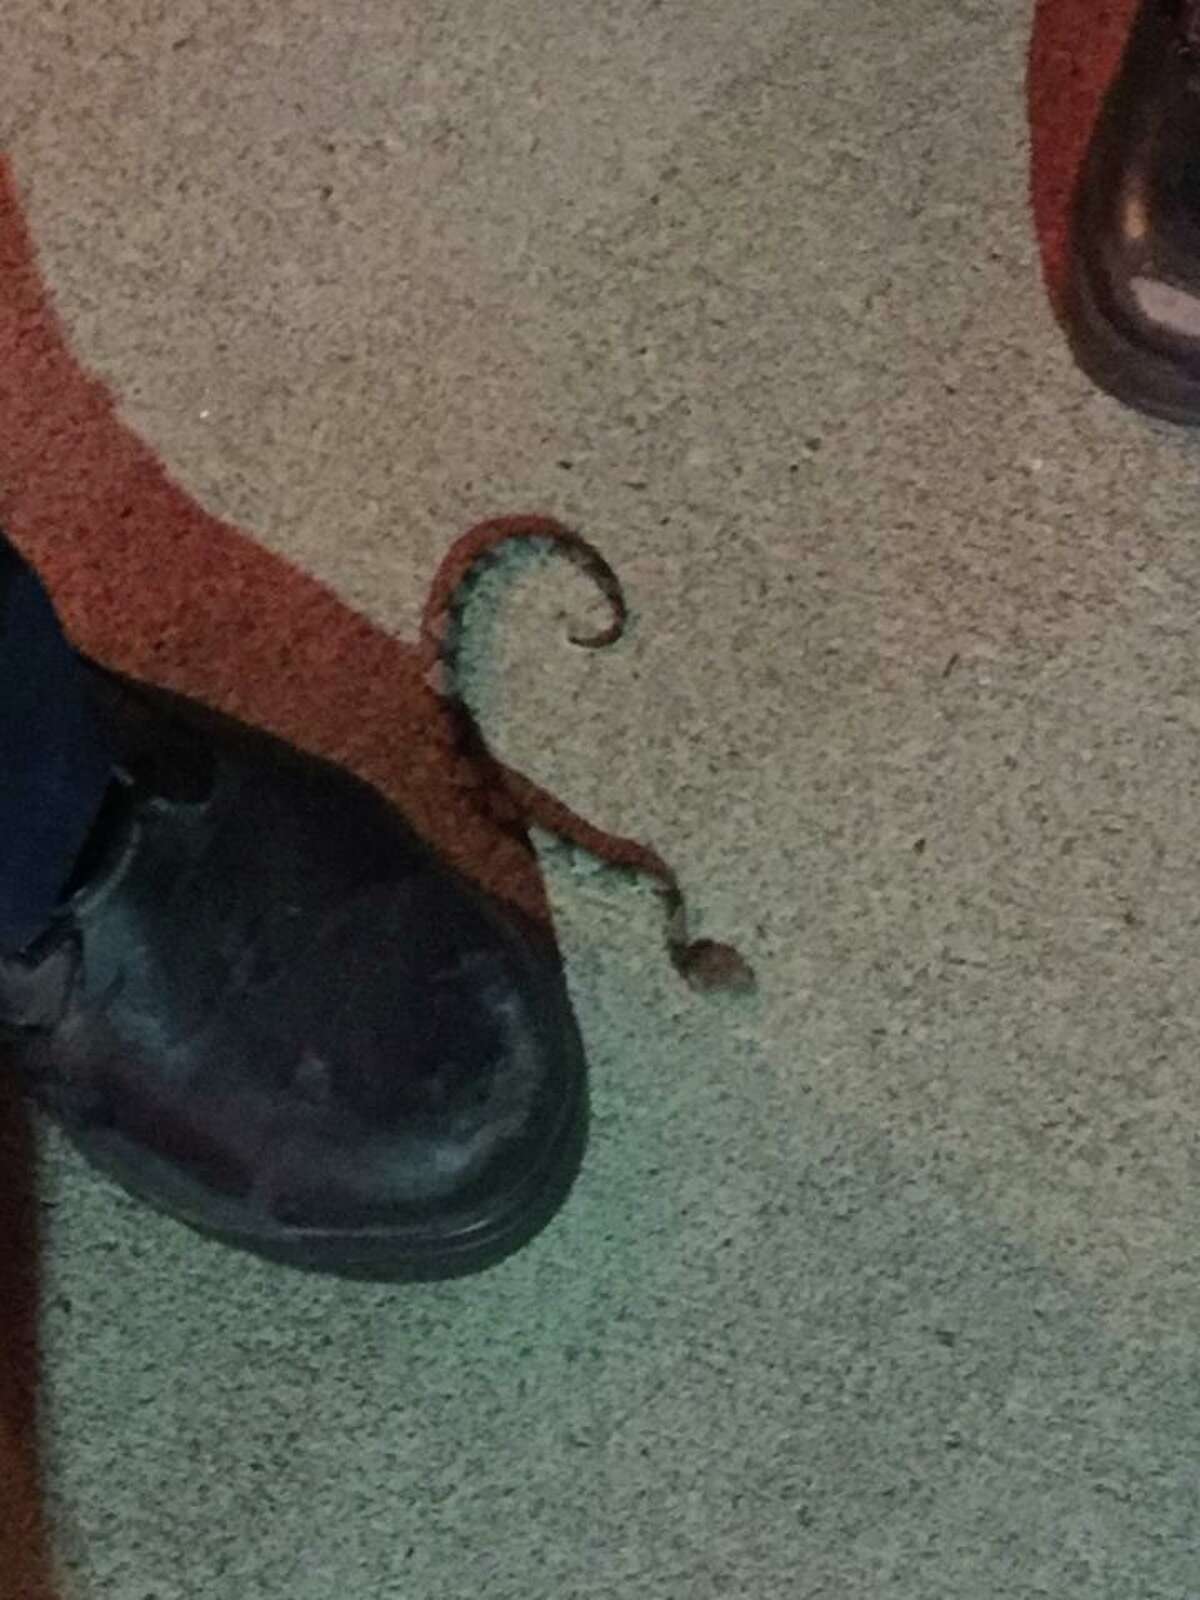 A photo of the 80-in snake that bit Myrick. WARNING: Graphic images follow